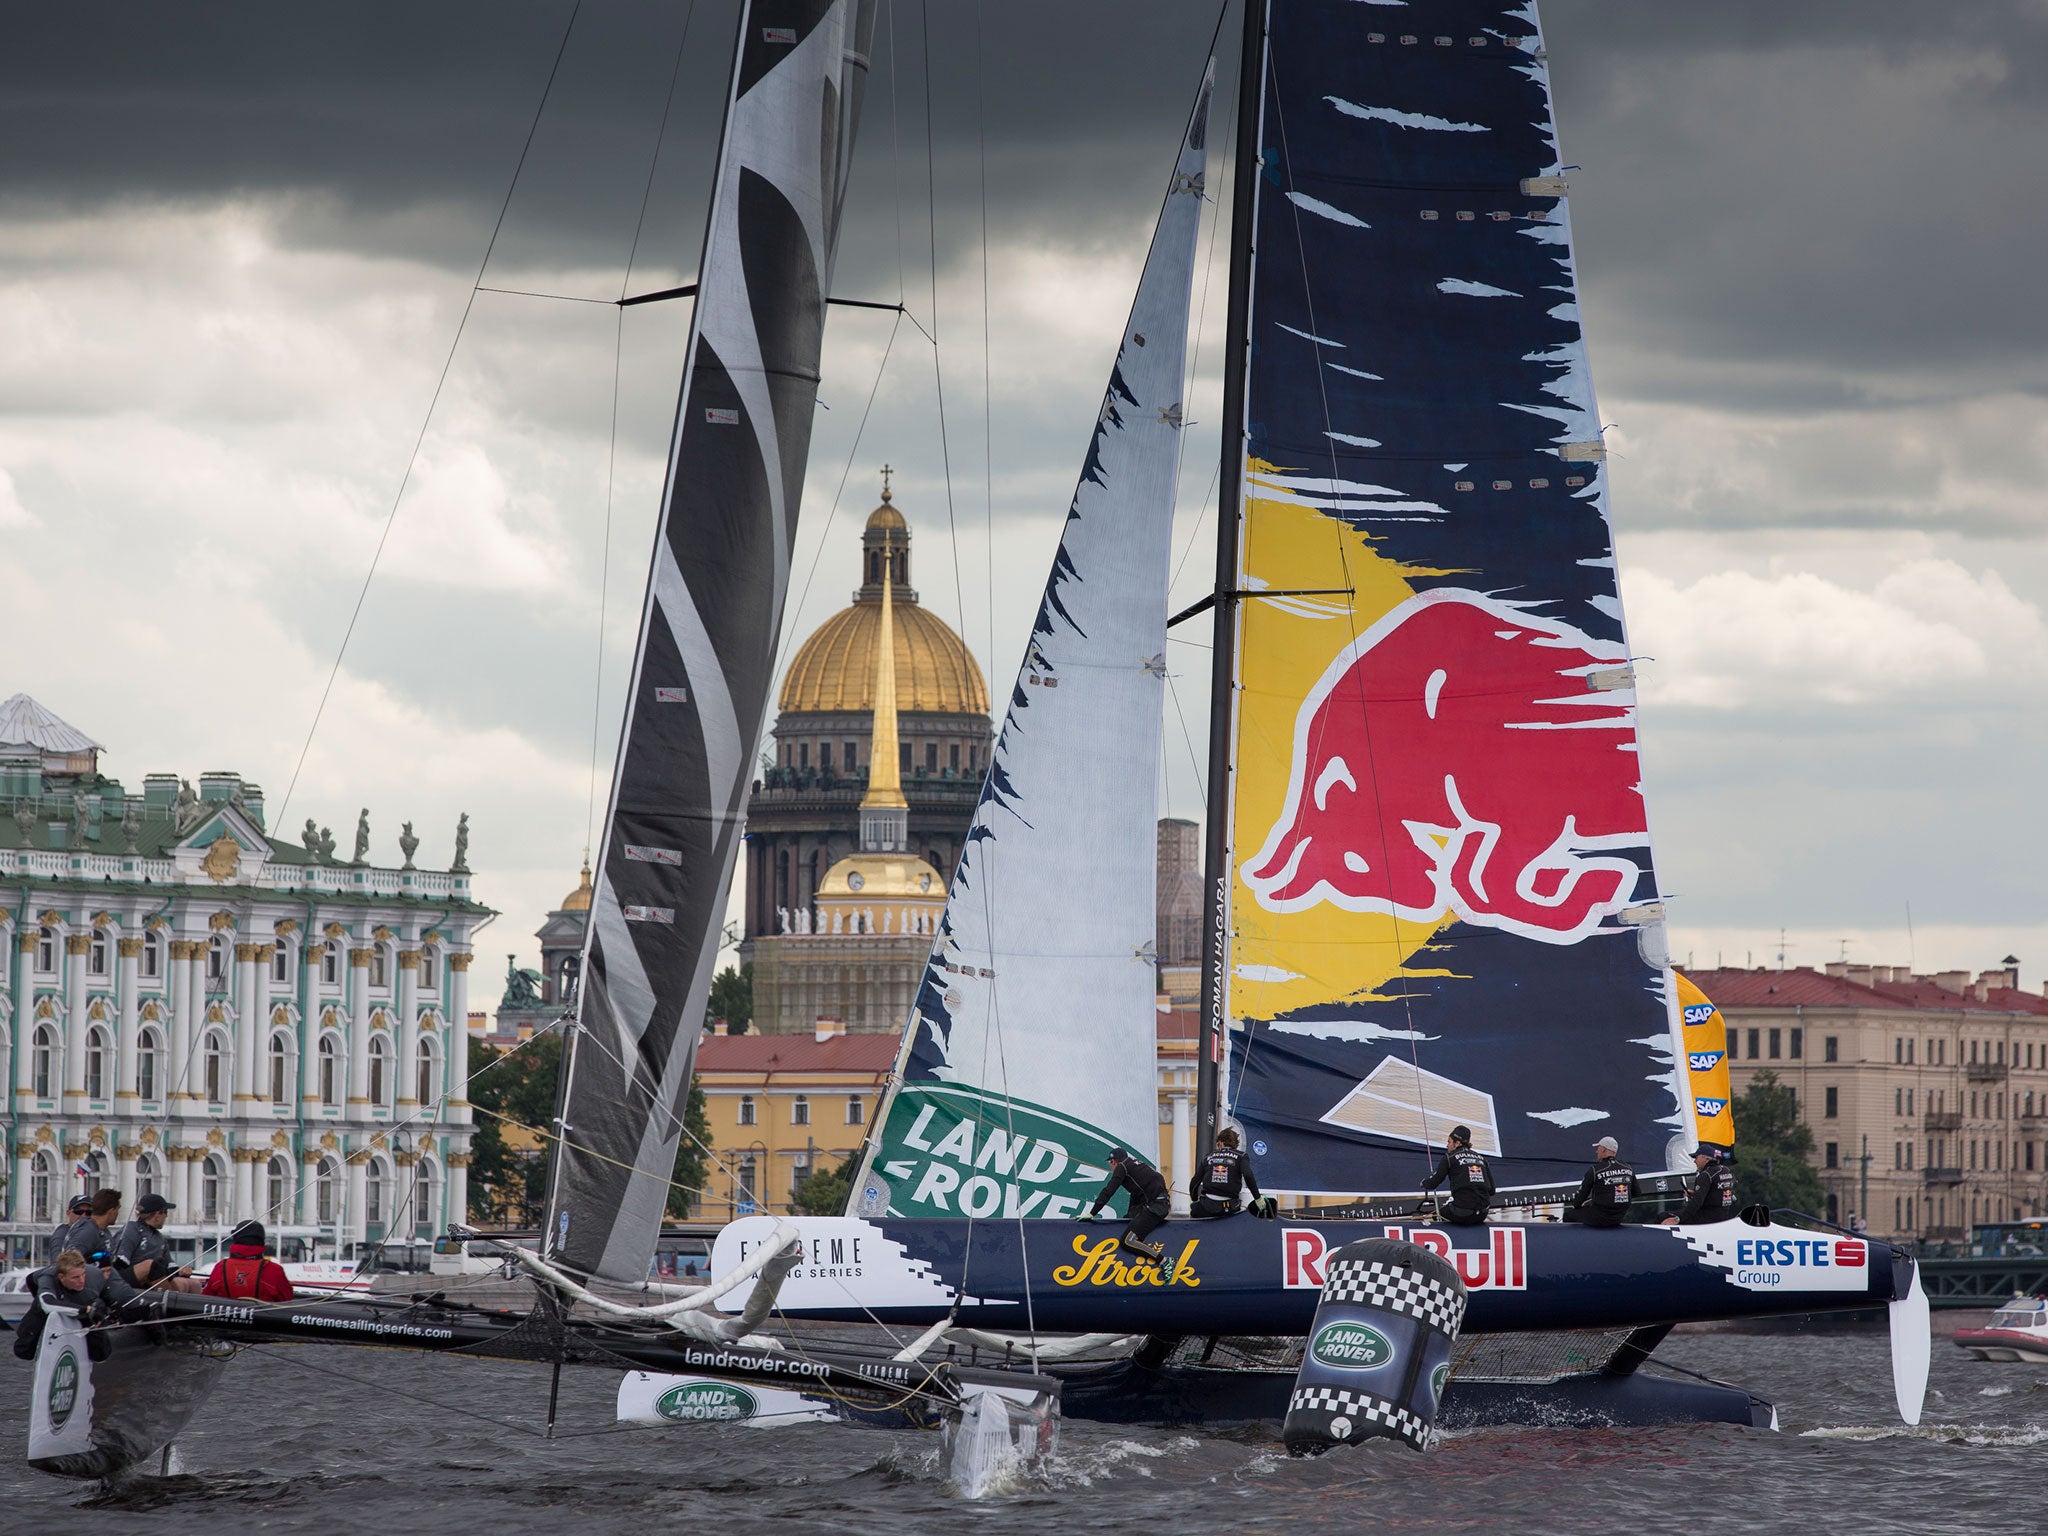 Flat conditions did not prevent spikey action between Team New Zealand and Red Bull on St. Petersburg’s Neva River on the opening day of the Extreme Sailing Series. The cathedral of St. Isaac stands quietly in the background.